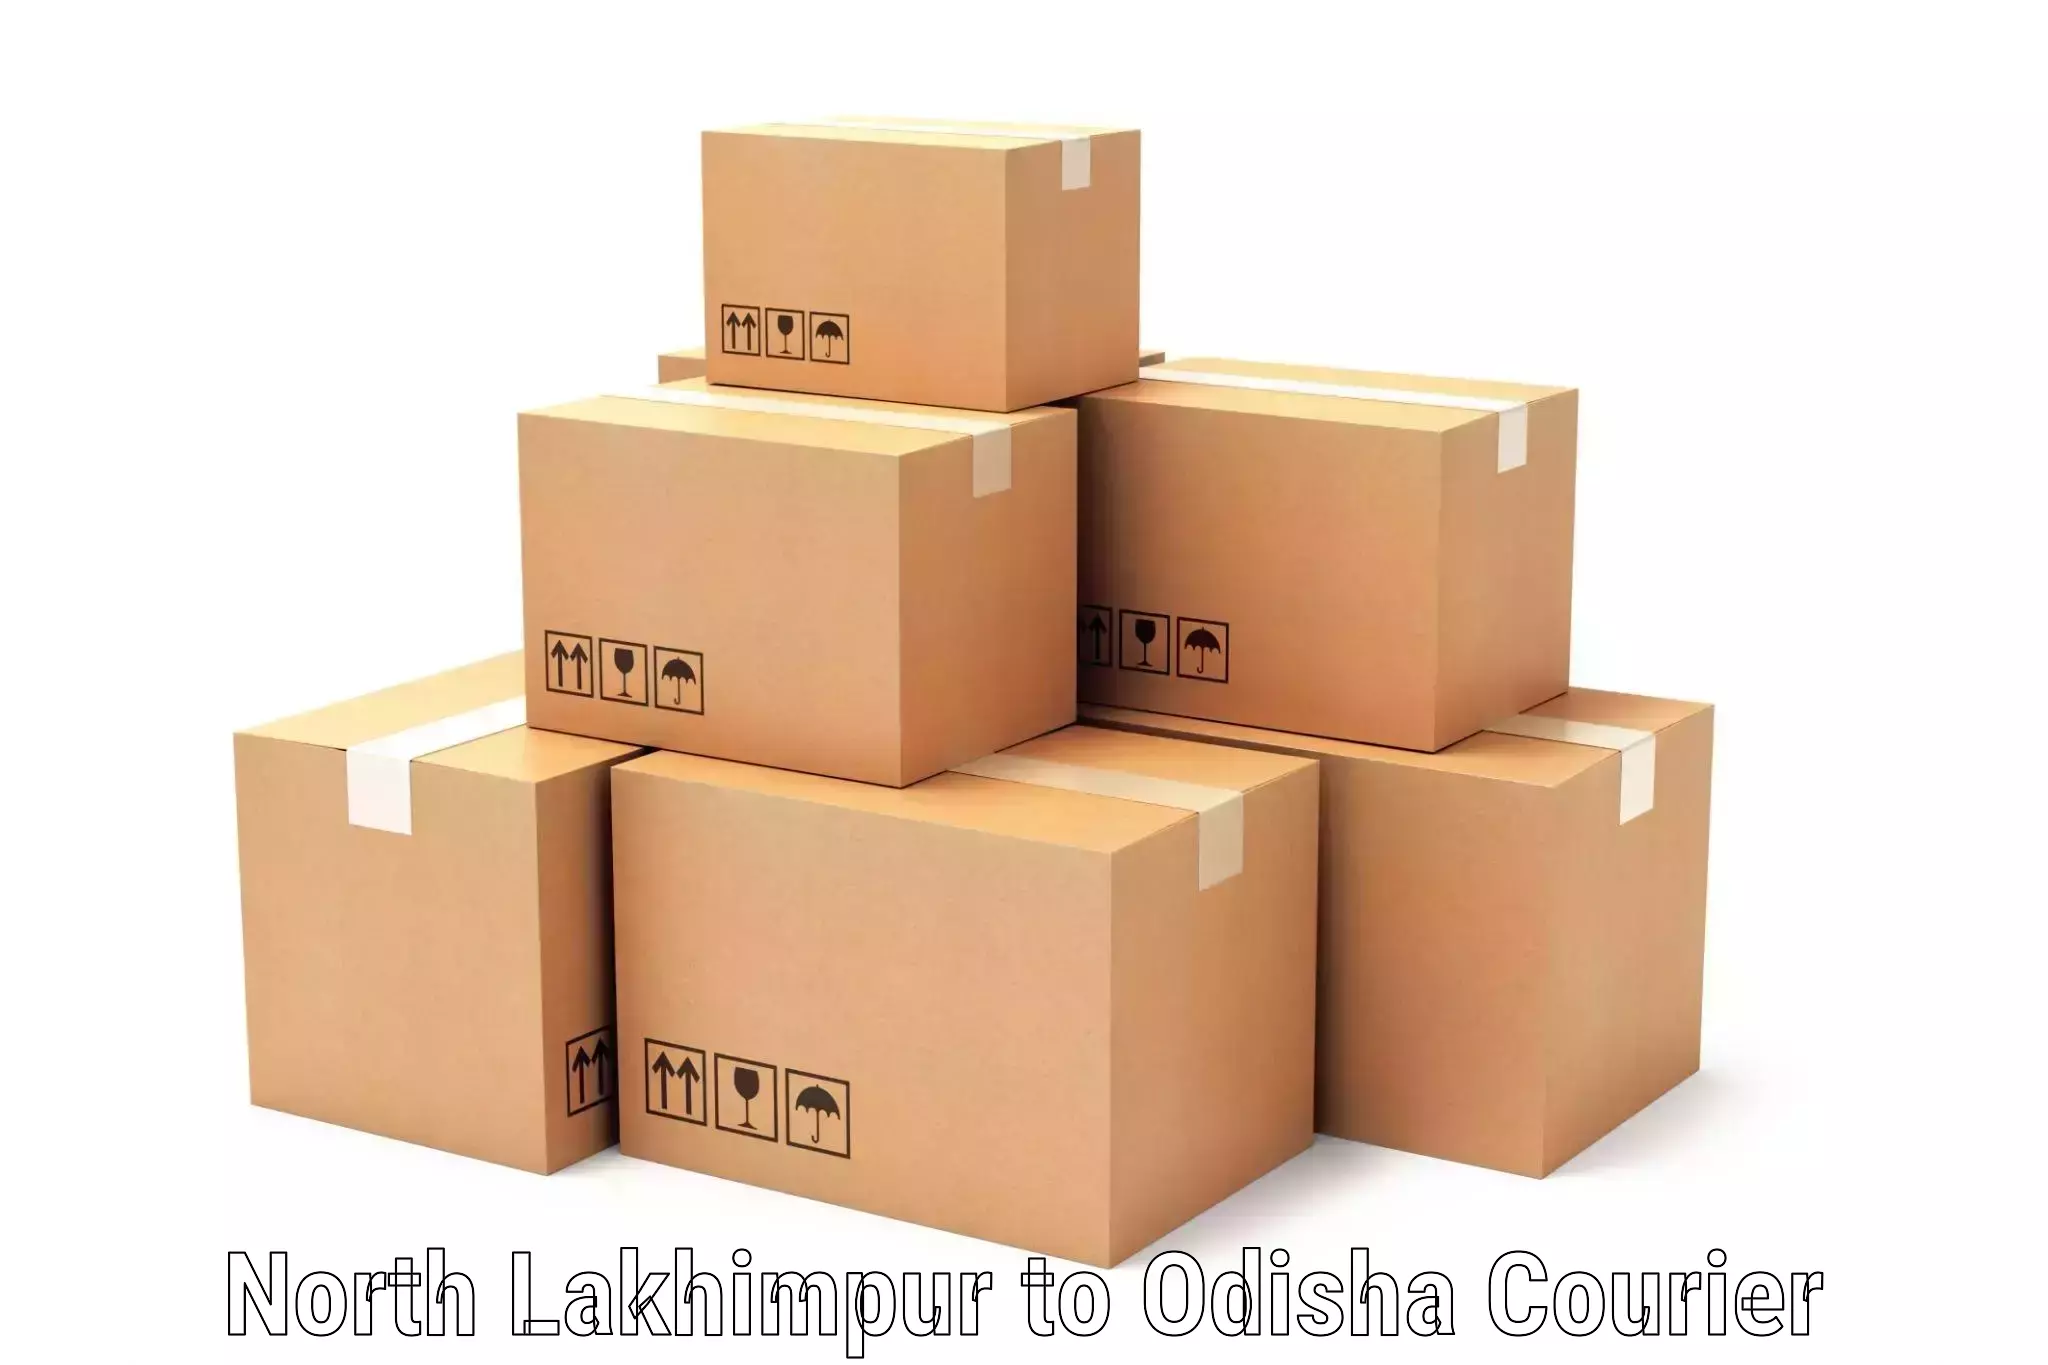 Full-service courier options North Lakhimpur to Rourkela